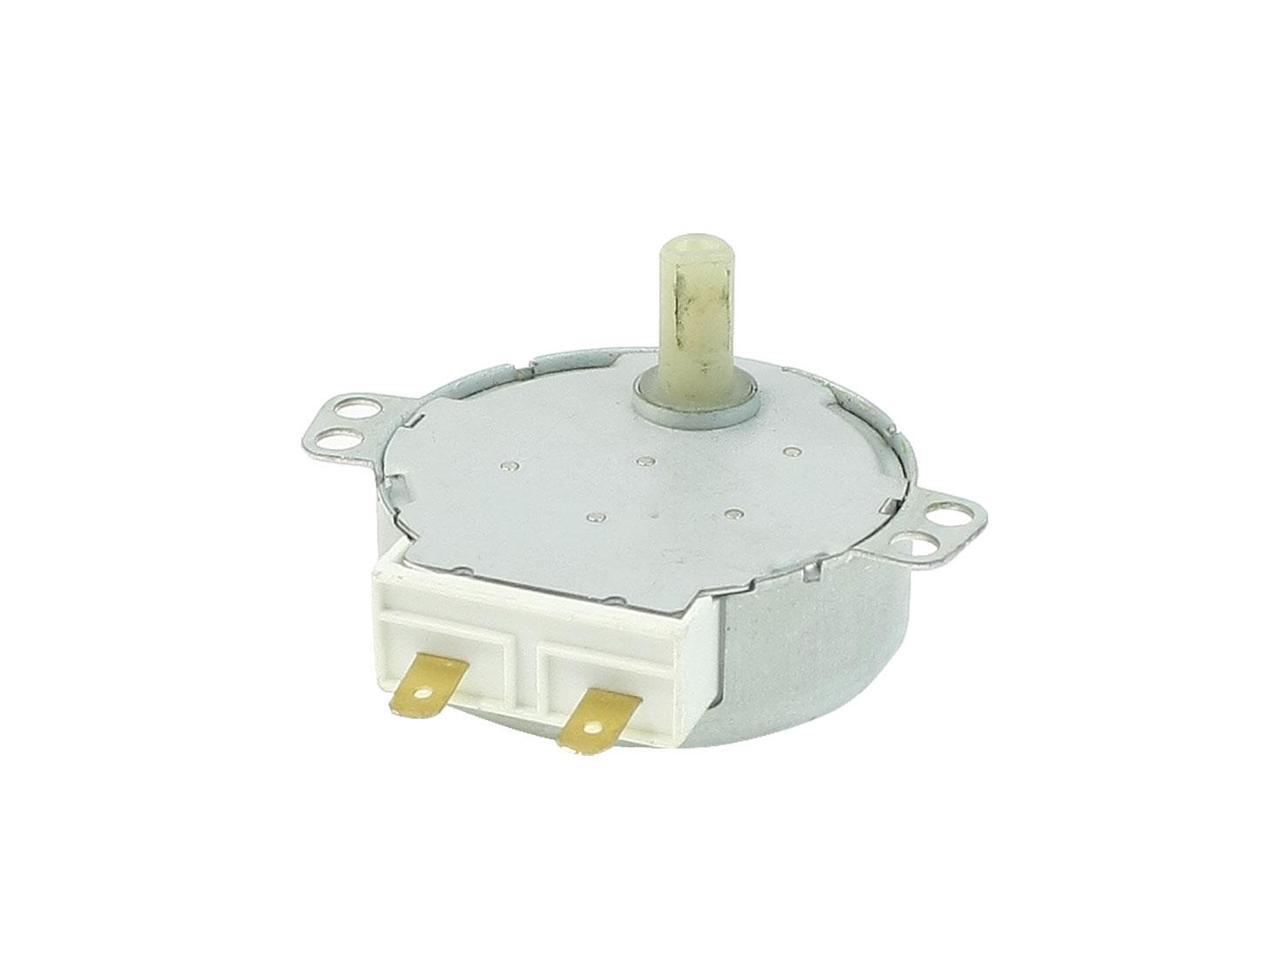 CW/CCW Turntable Microwave Oven Synchronous Motor AC 220-240V 4RPM 4W Uomtj 